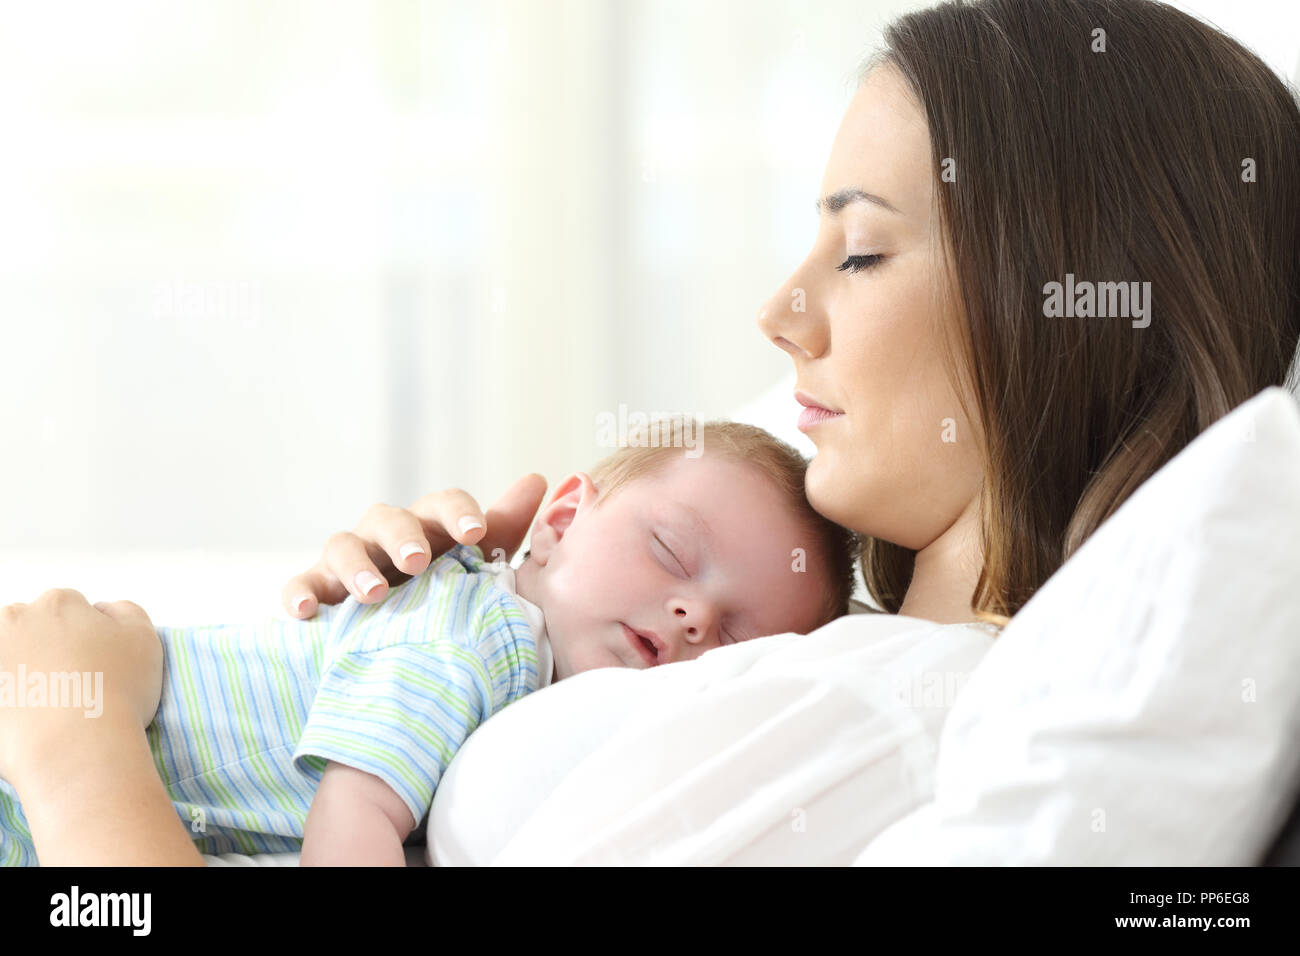 Profile of a serious mother sleeping with her baby on a bed Stock Photo